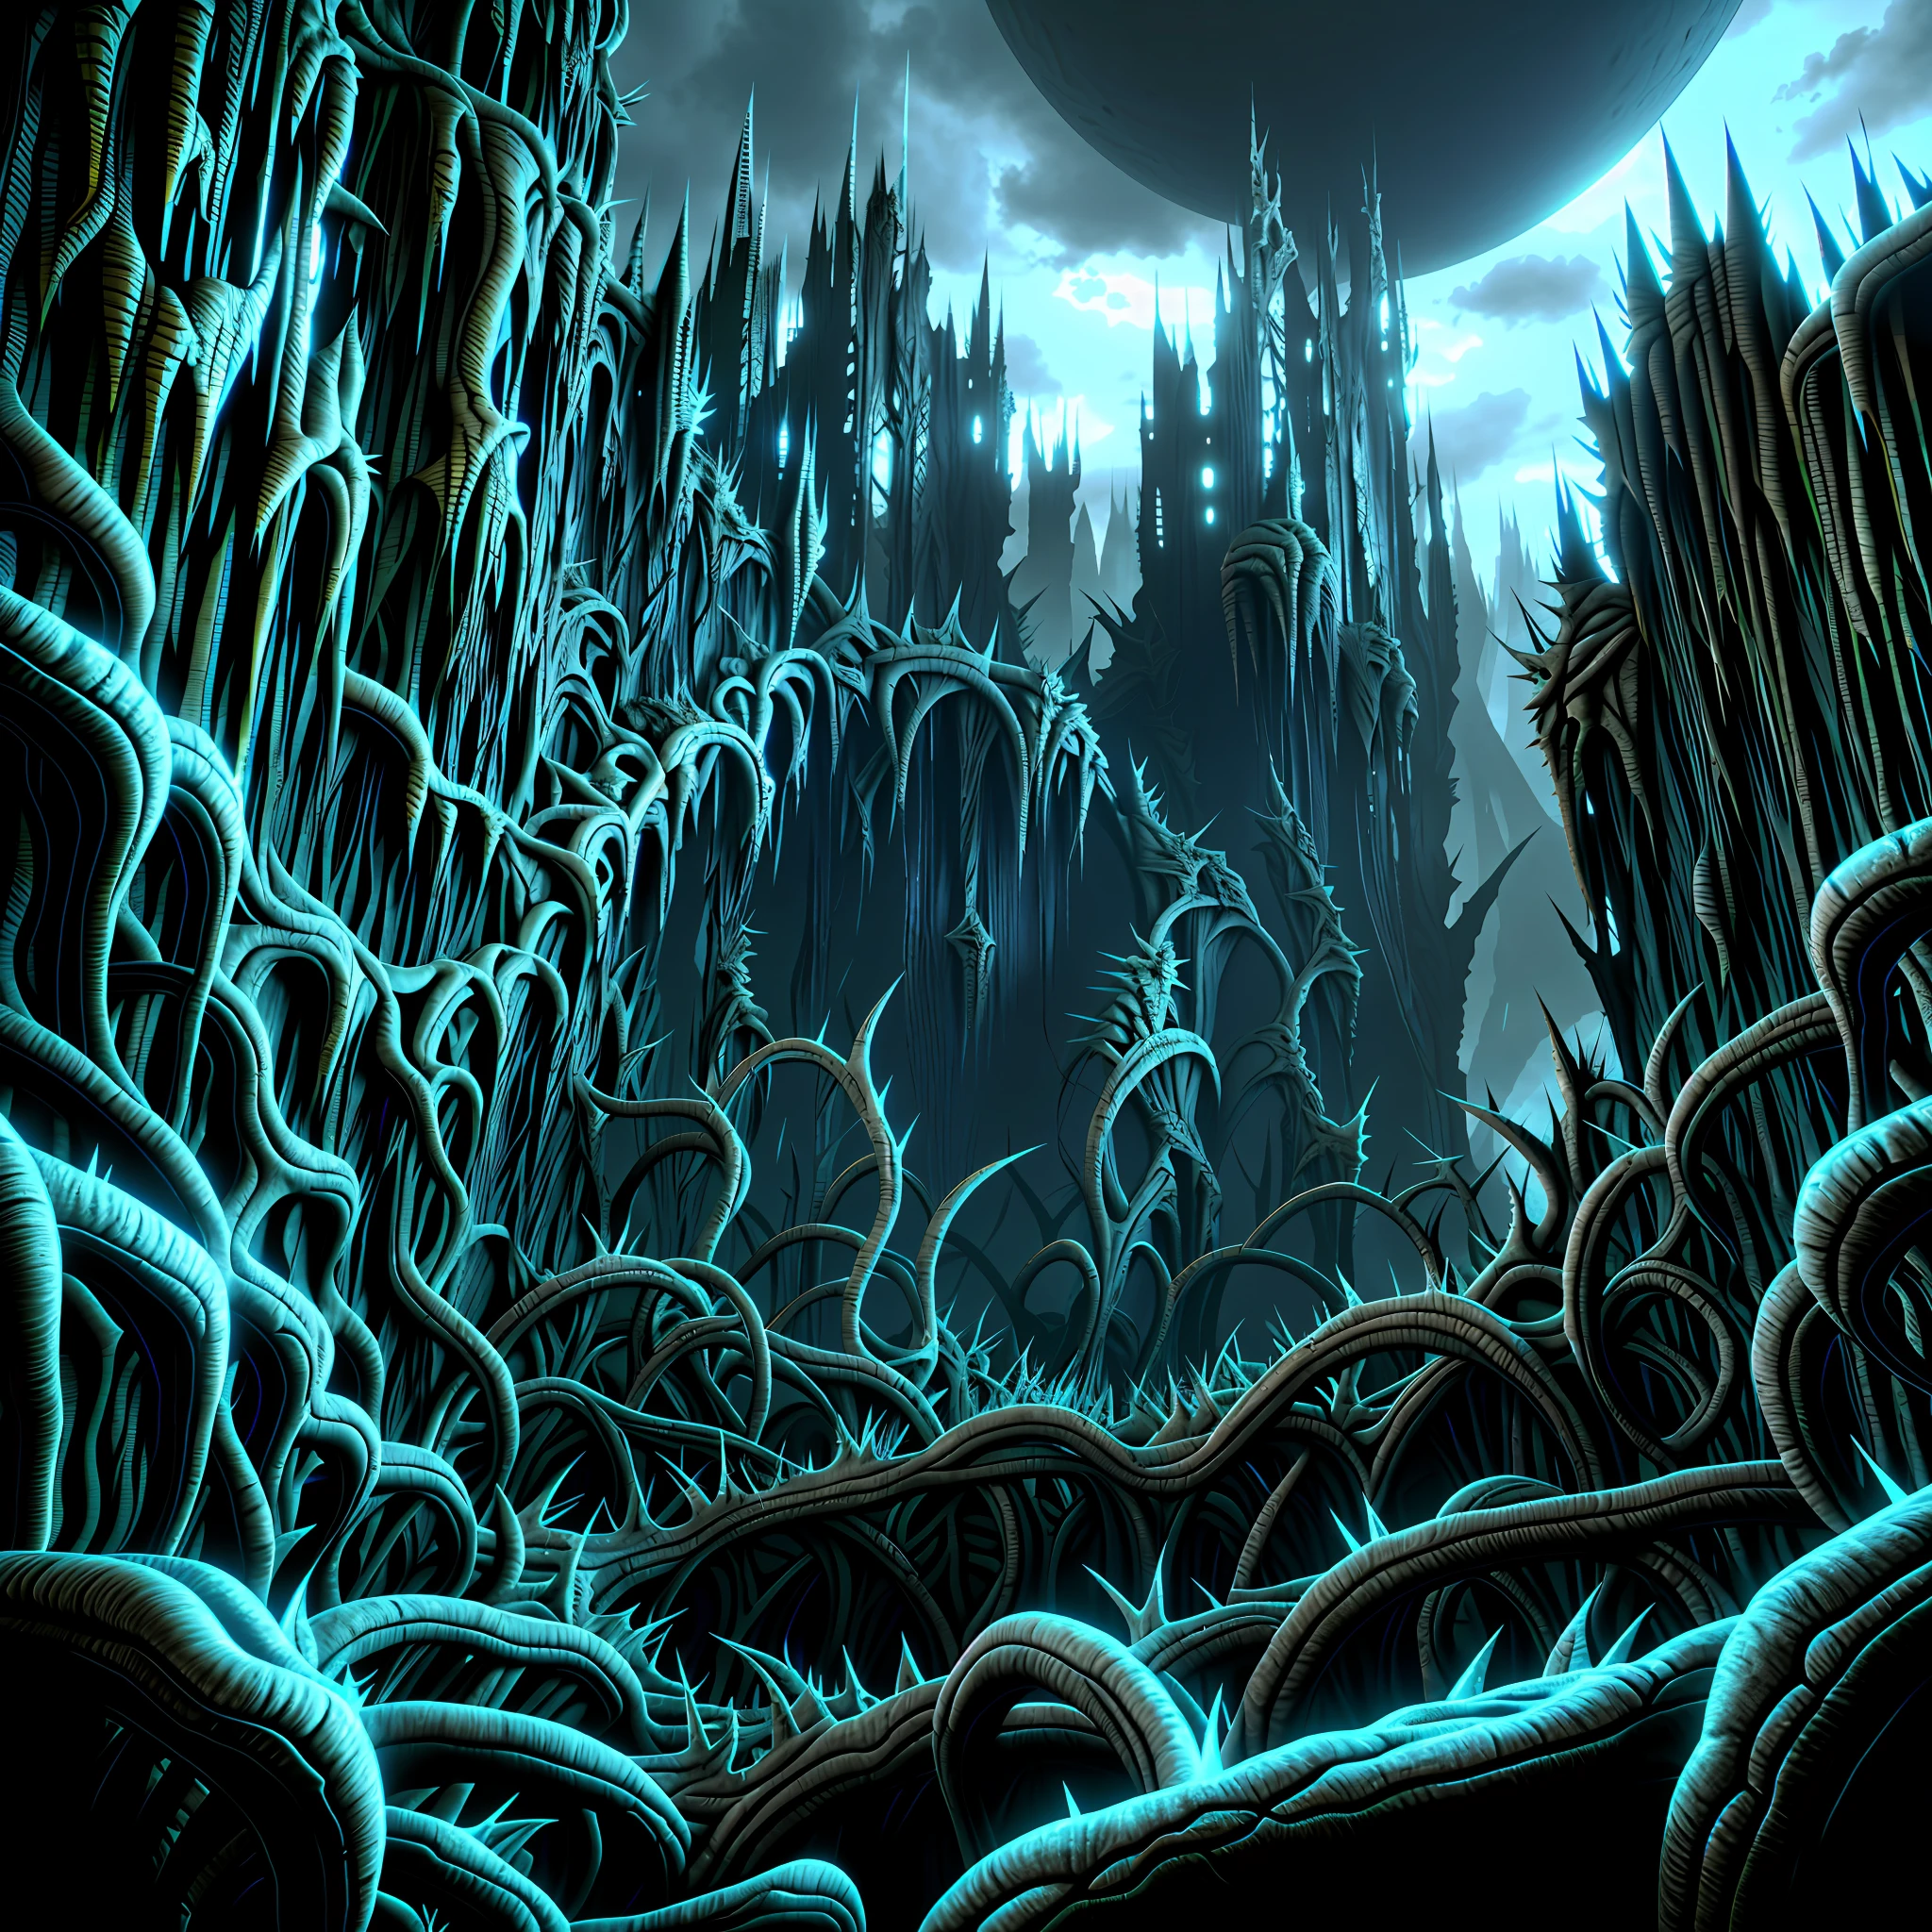 vast angle, view from the top, horror art, landscape of complex biomechanicals, biomorphic negative dimension, spiked walls, madness, thorns, artstation, UHD, unreal engine, sketch color drawing. 3D model style.